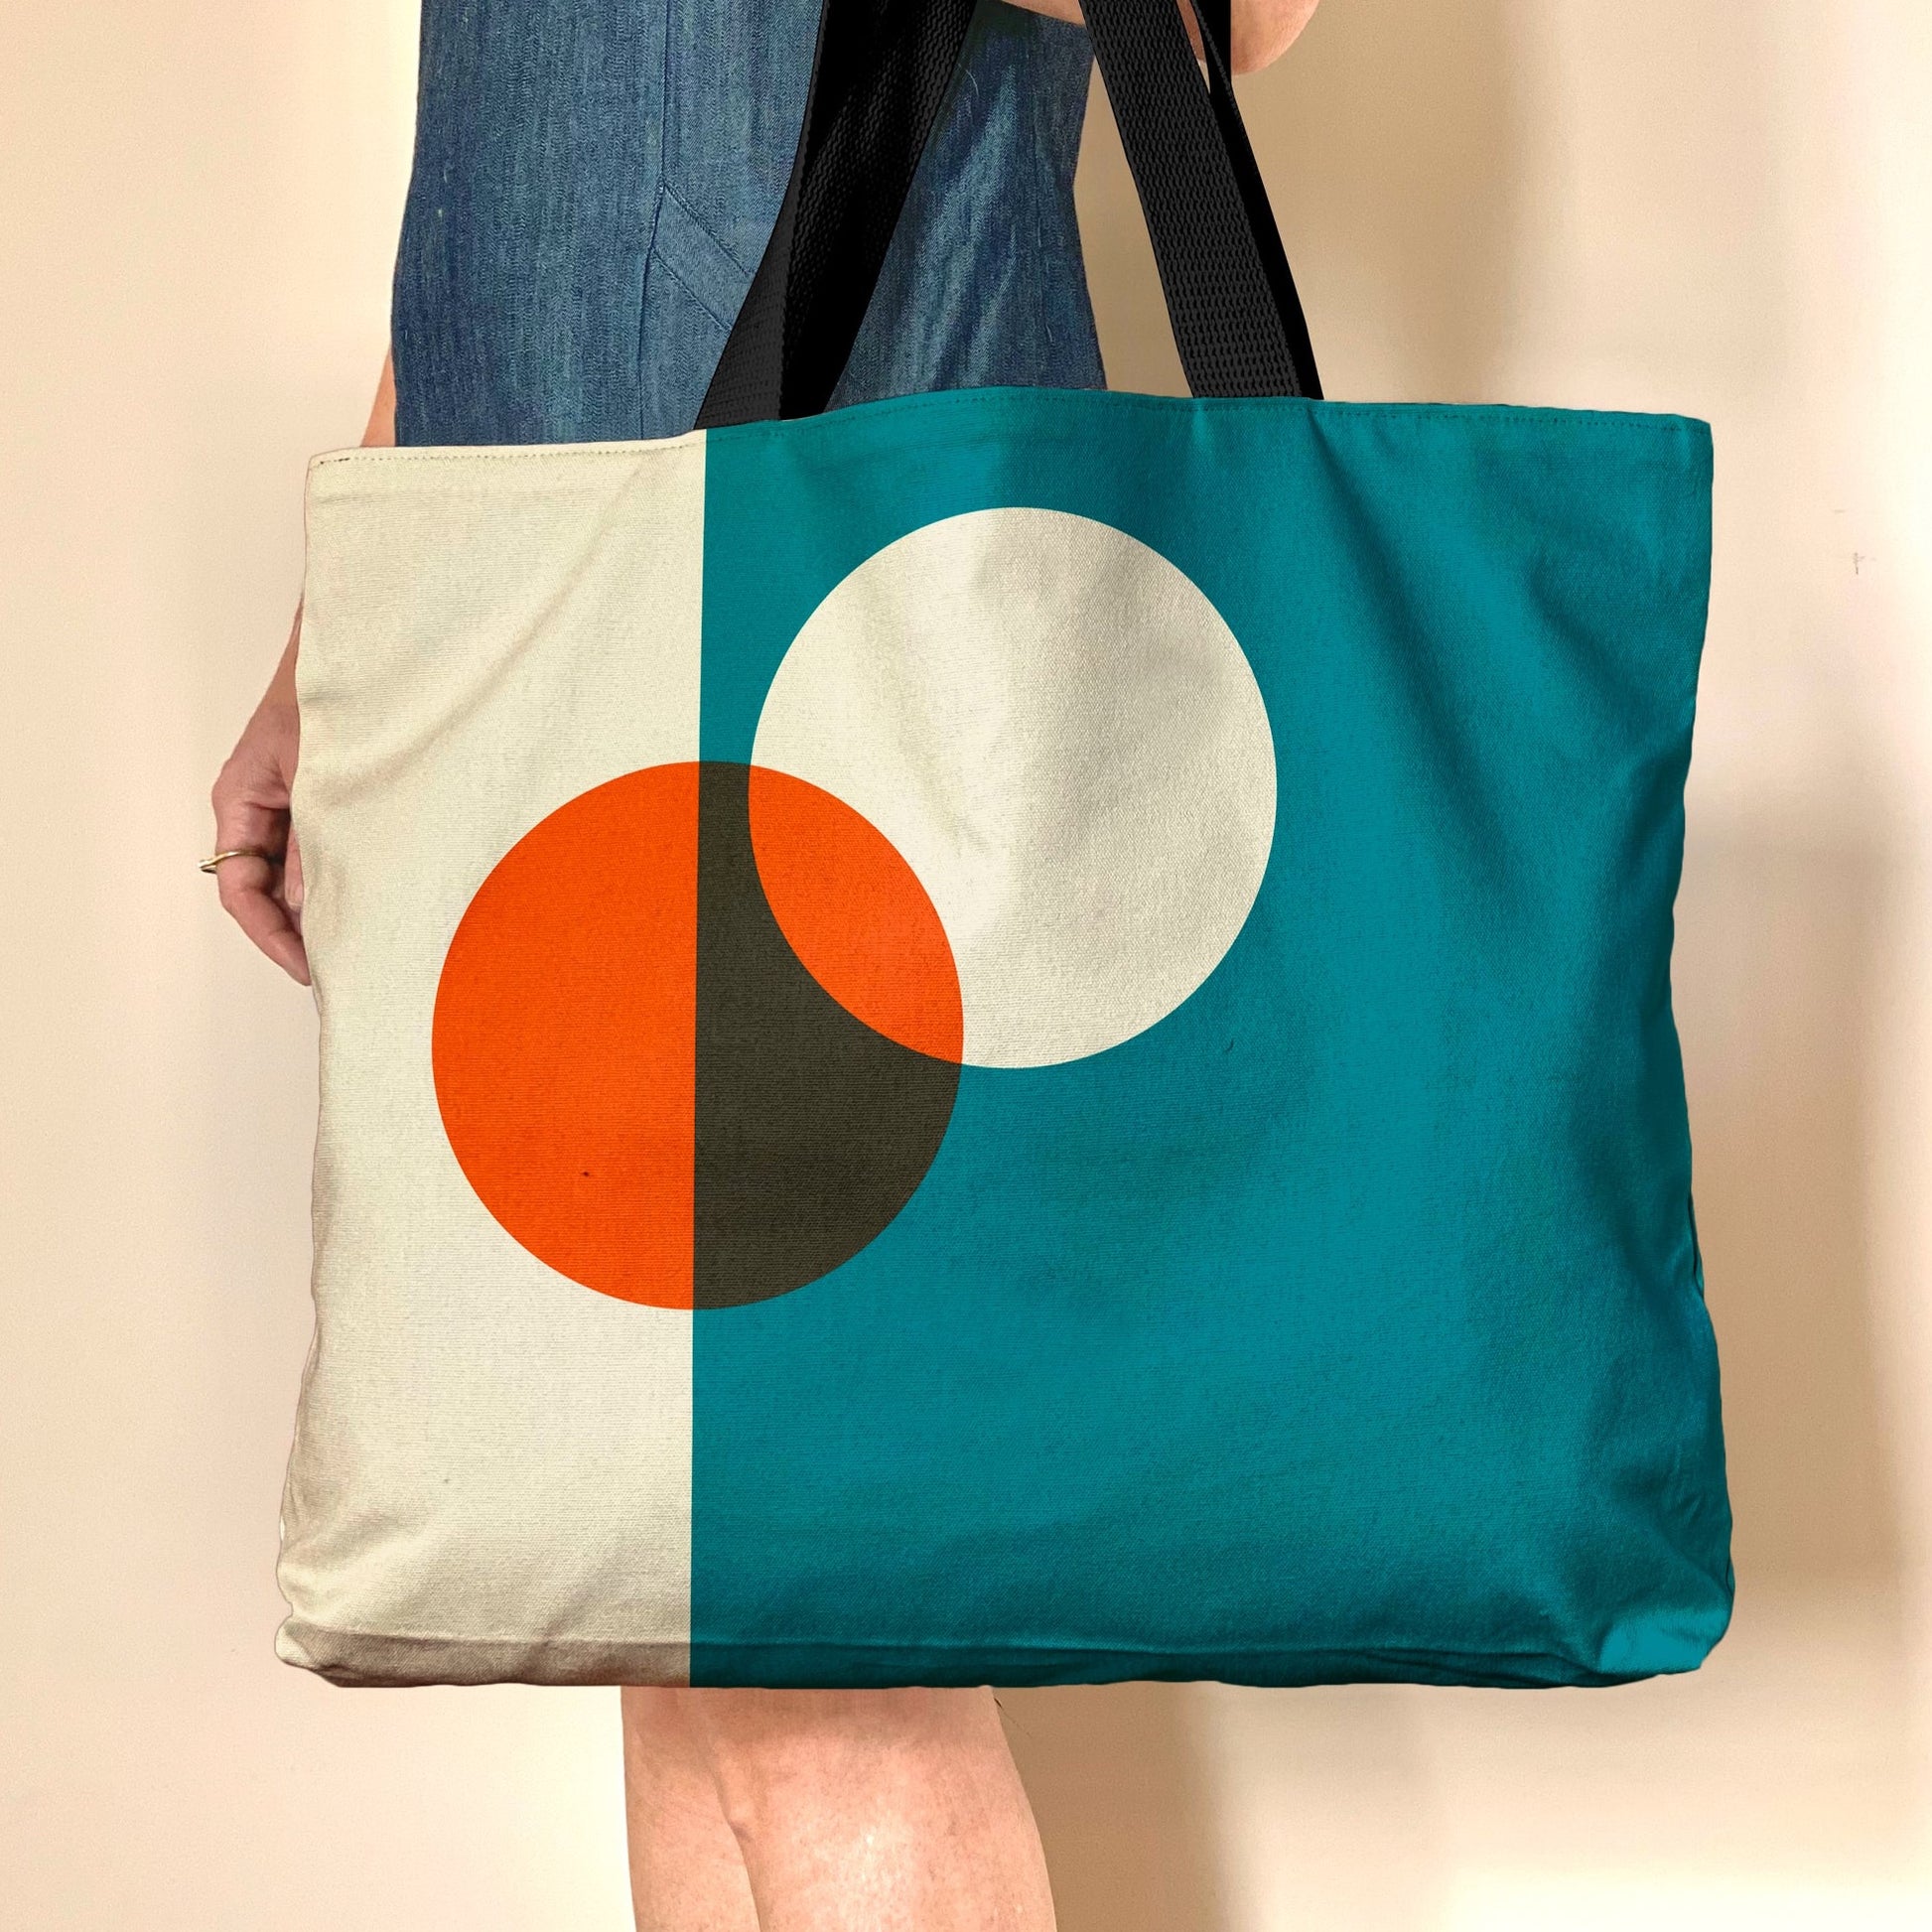 Bauhaus inspired oversized cotton canvas tote  with geometric orange and white circles on a blue background.